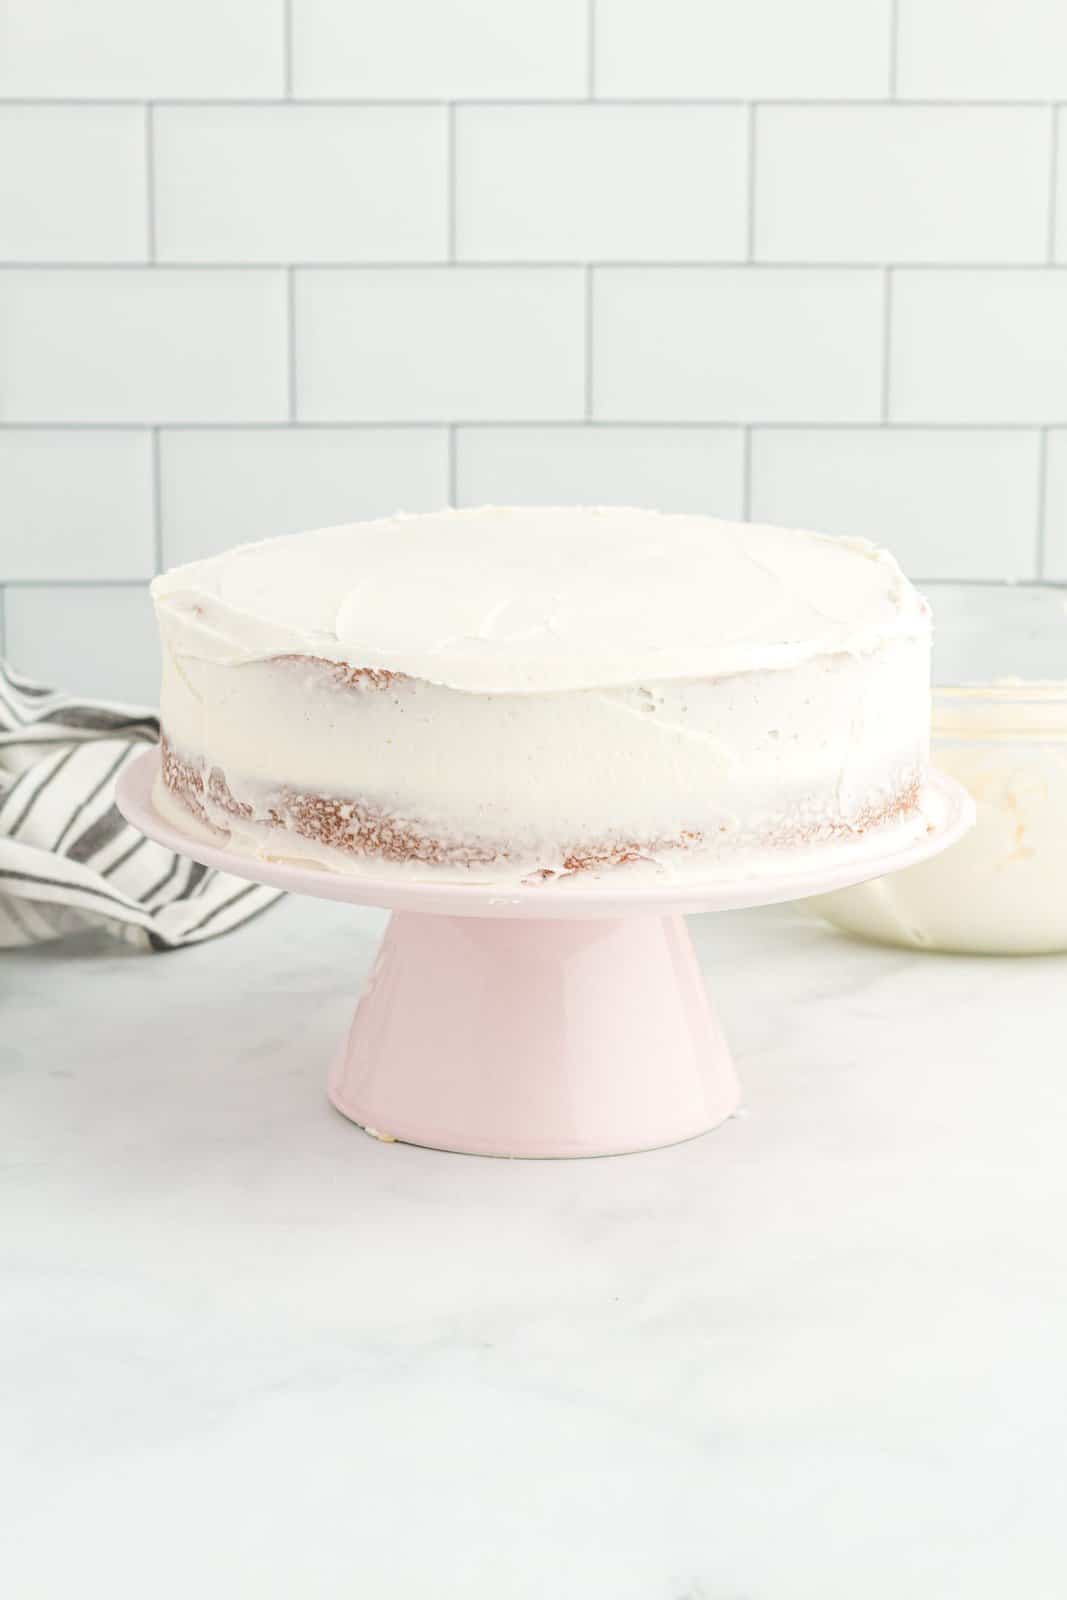 A homemade white cake with a crumb coat of frosting.